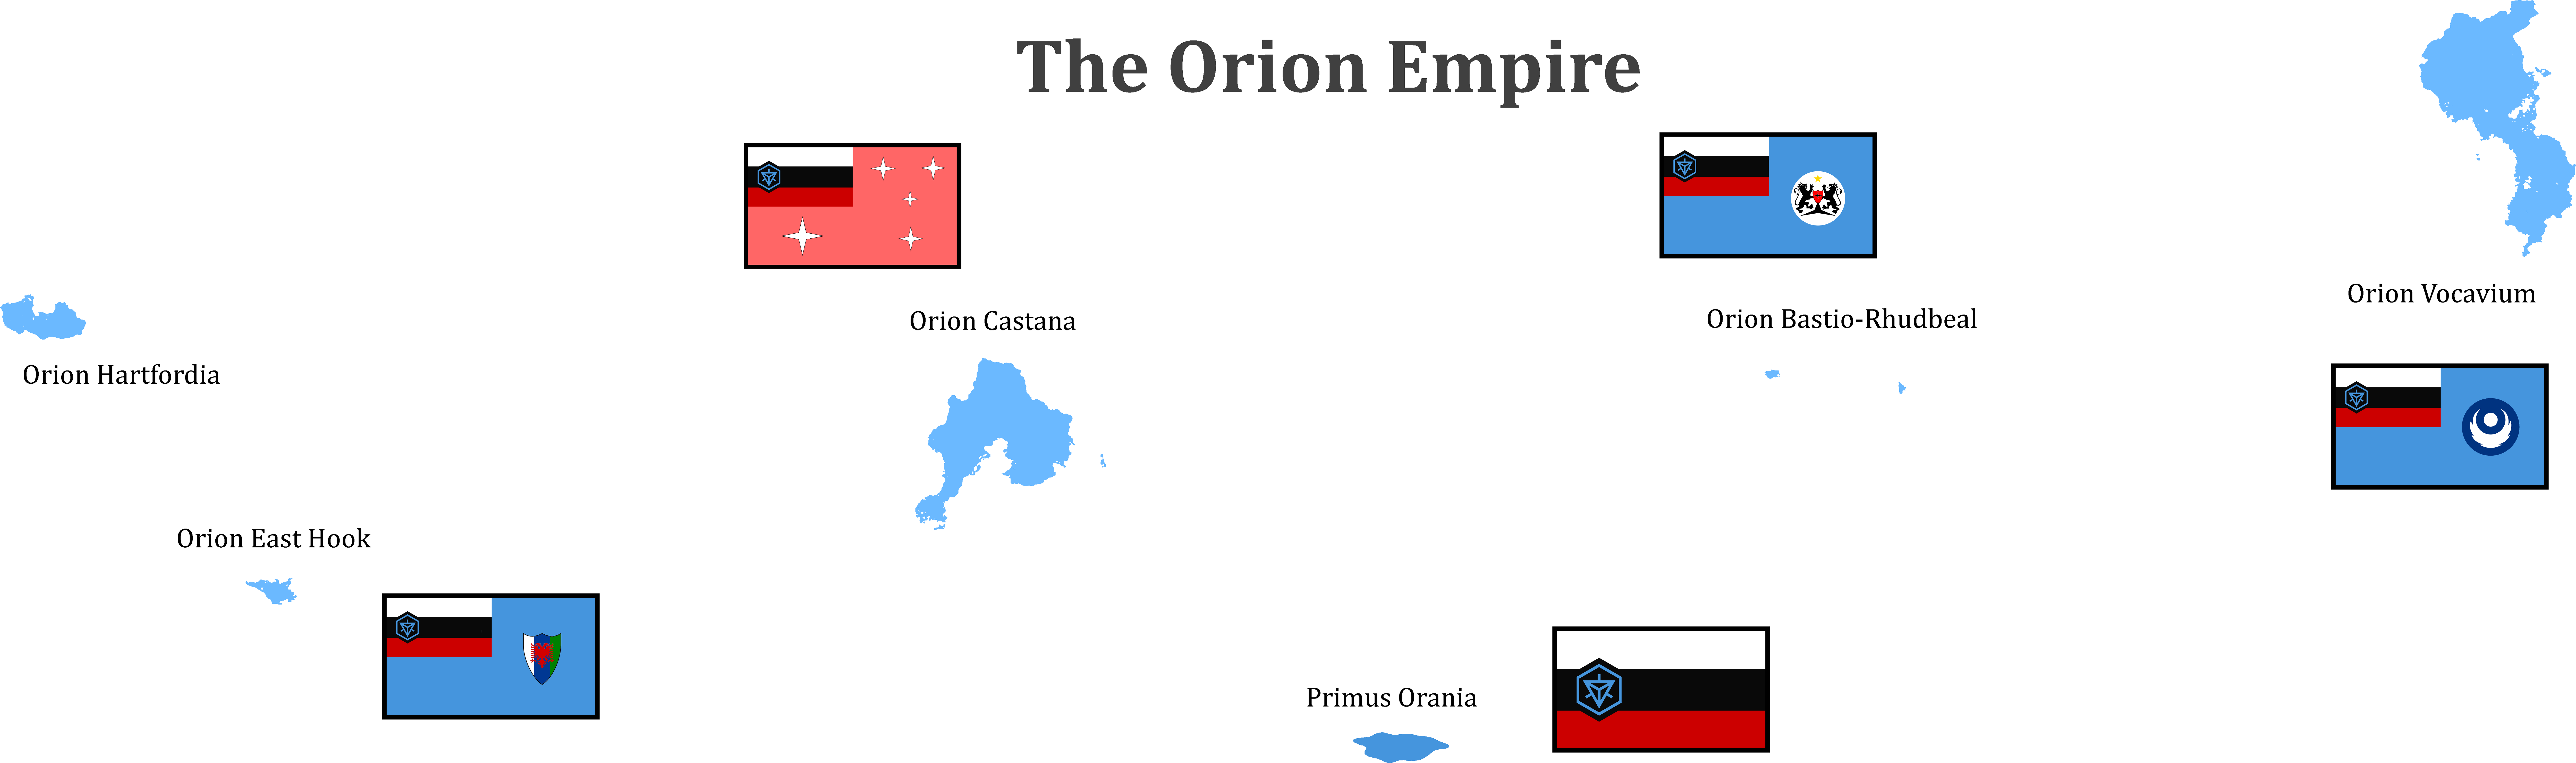 OrionItself.png